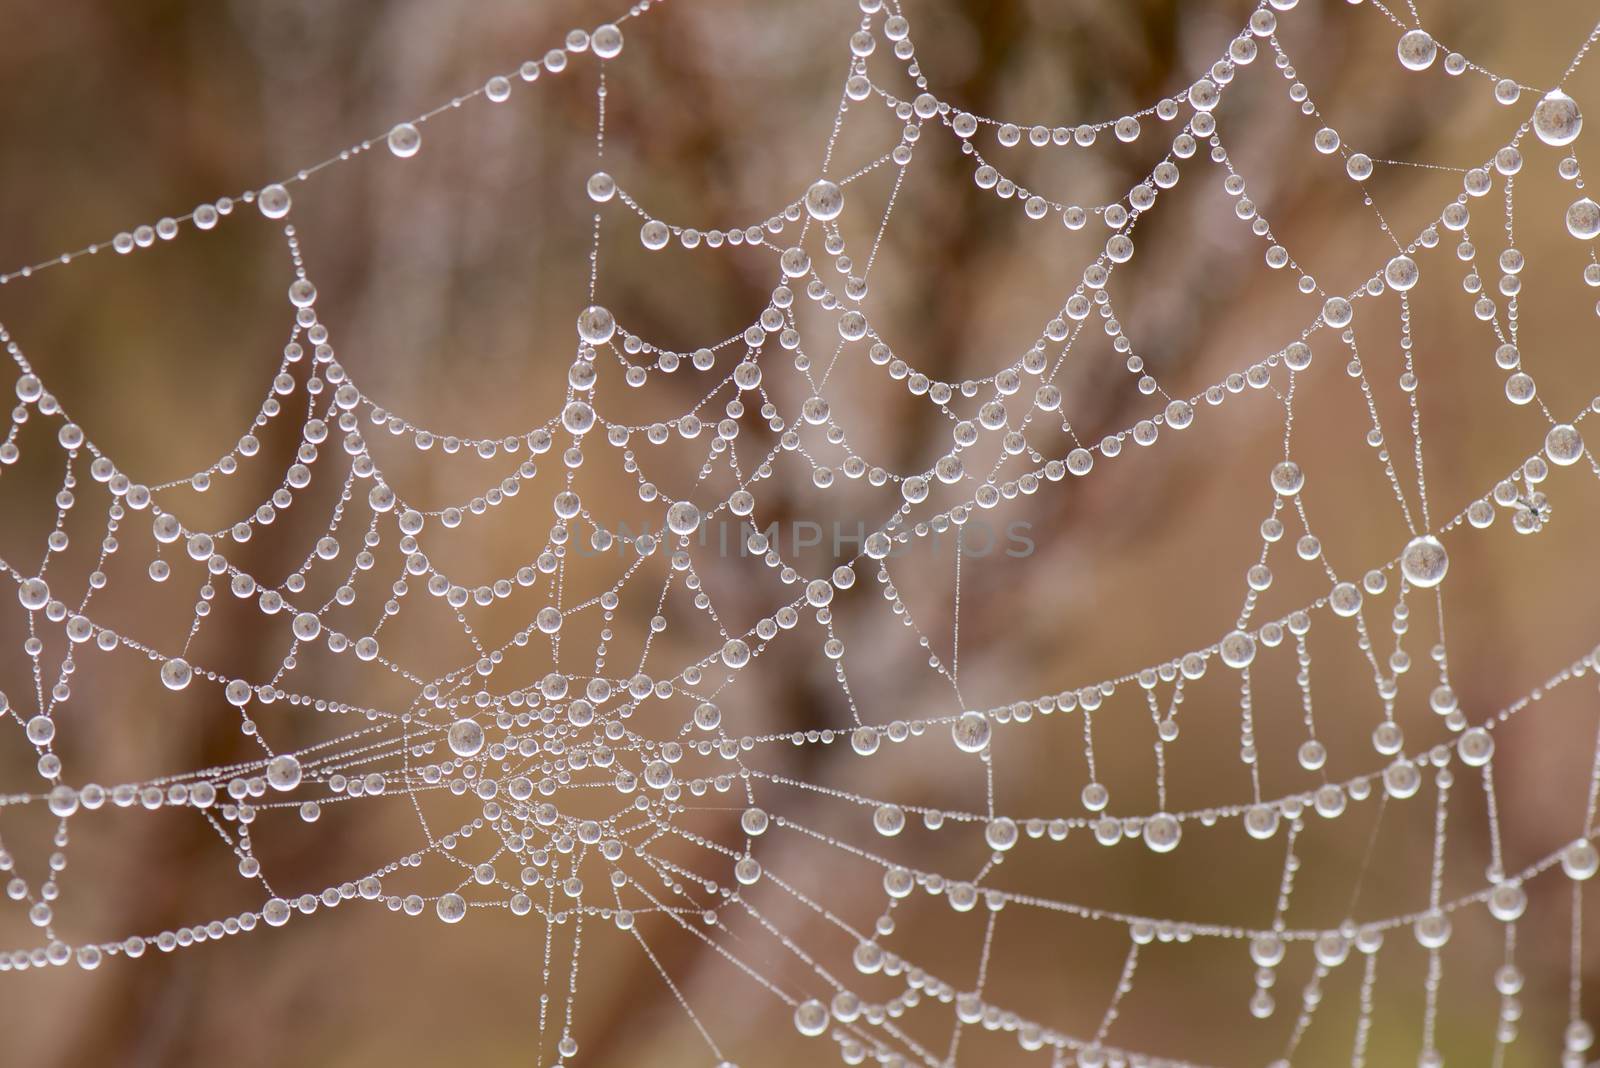 Spider Web with Pearl shaped dew drops